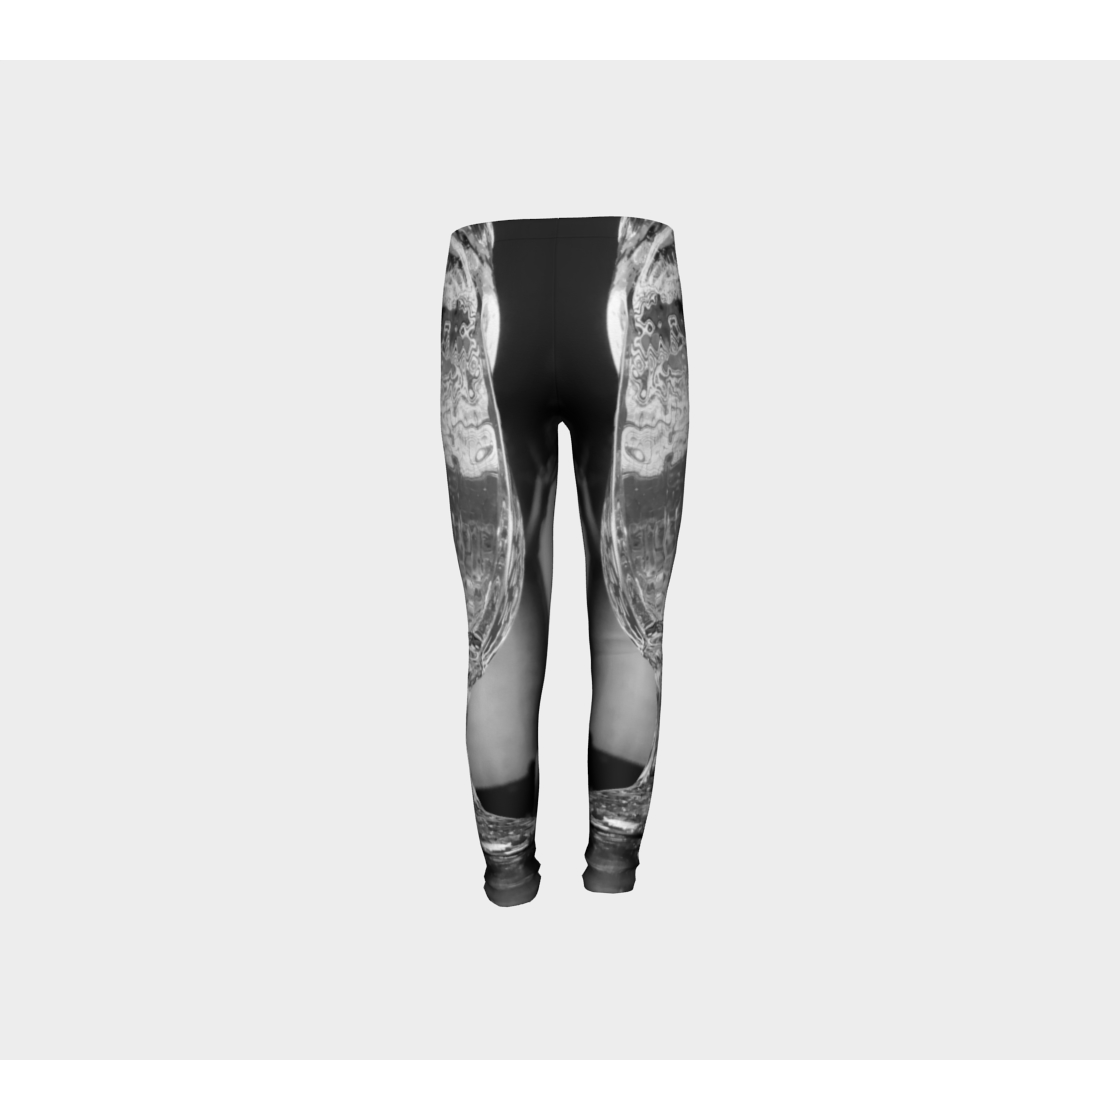 Youth Leggings for girls with: Water Glass Design, 4-5 years, back